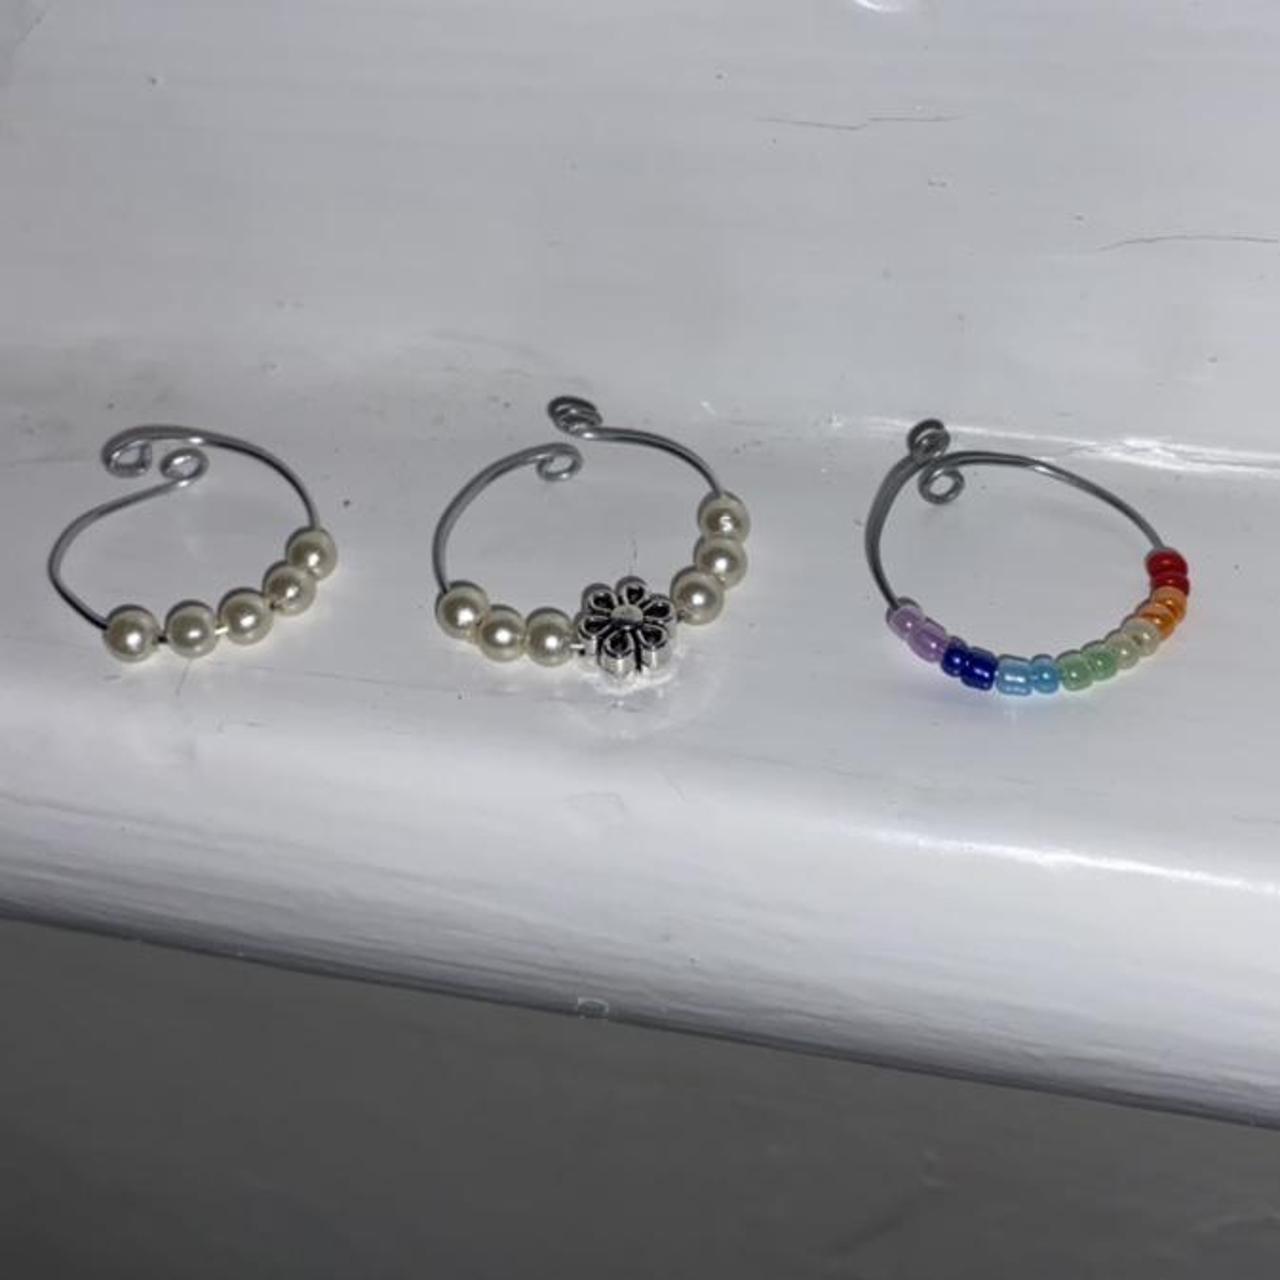 Product Image 2 - Anxiety rings!
Please message me which